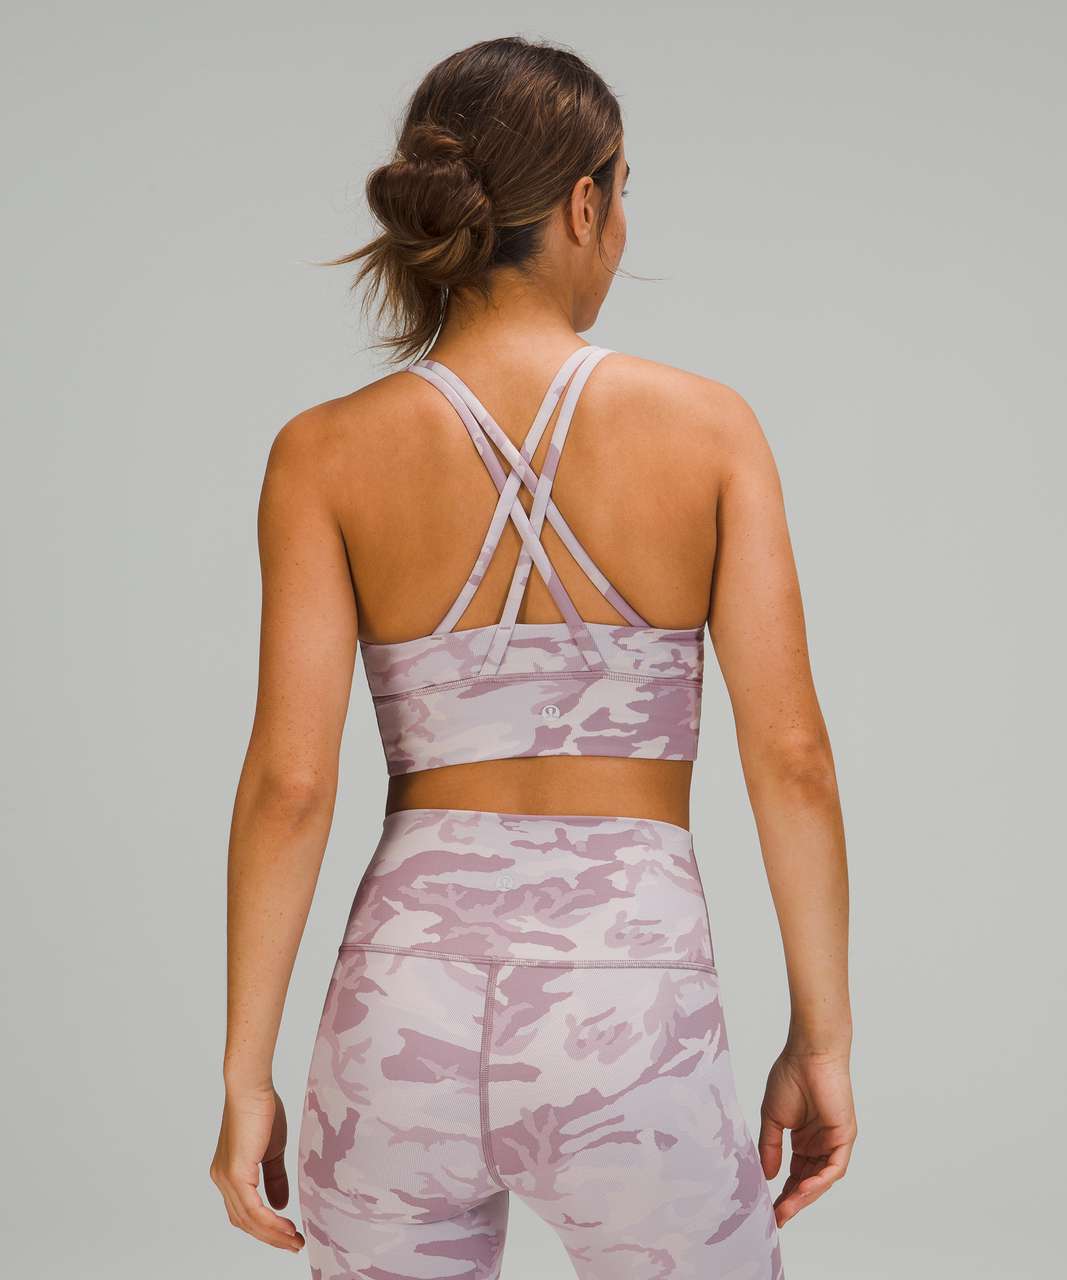 Lululemon Free to be Wild Sports Bra in Incognito Camo Jacquard